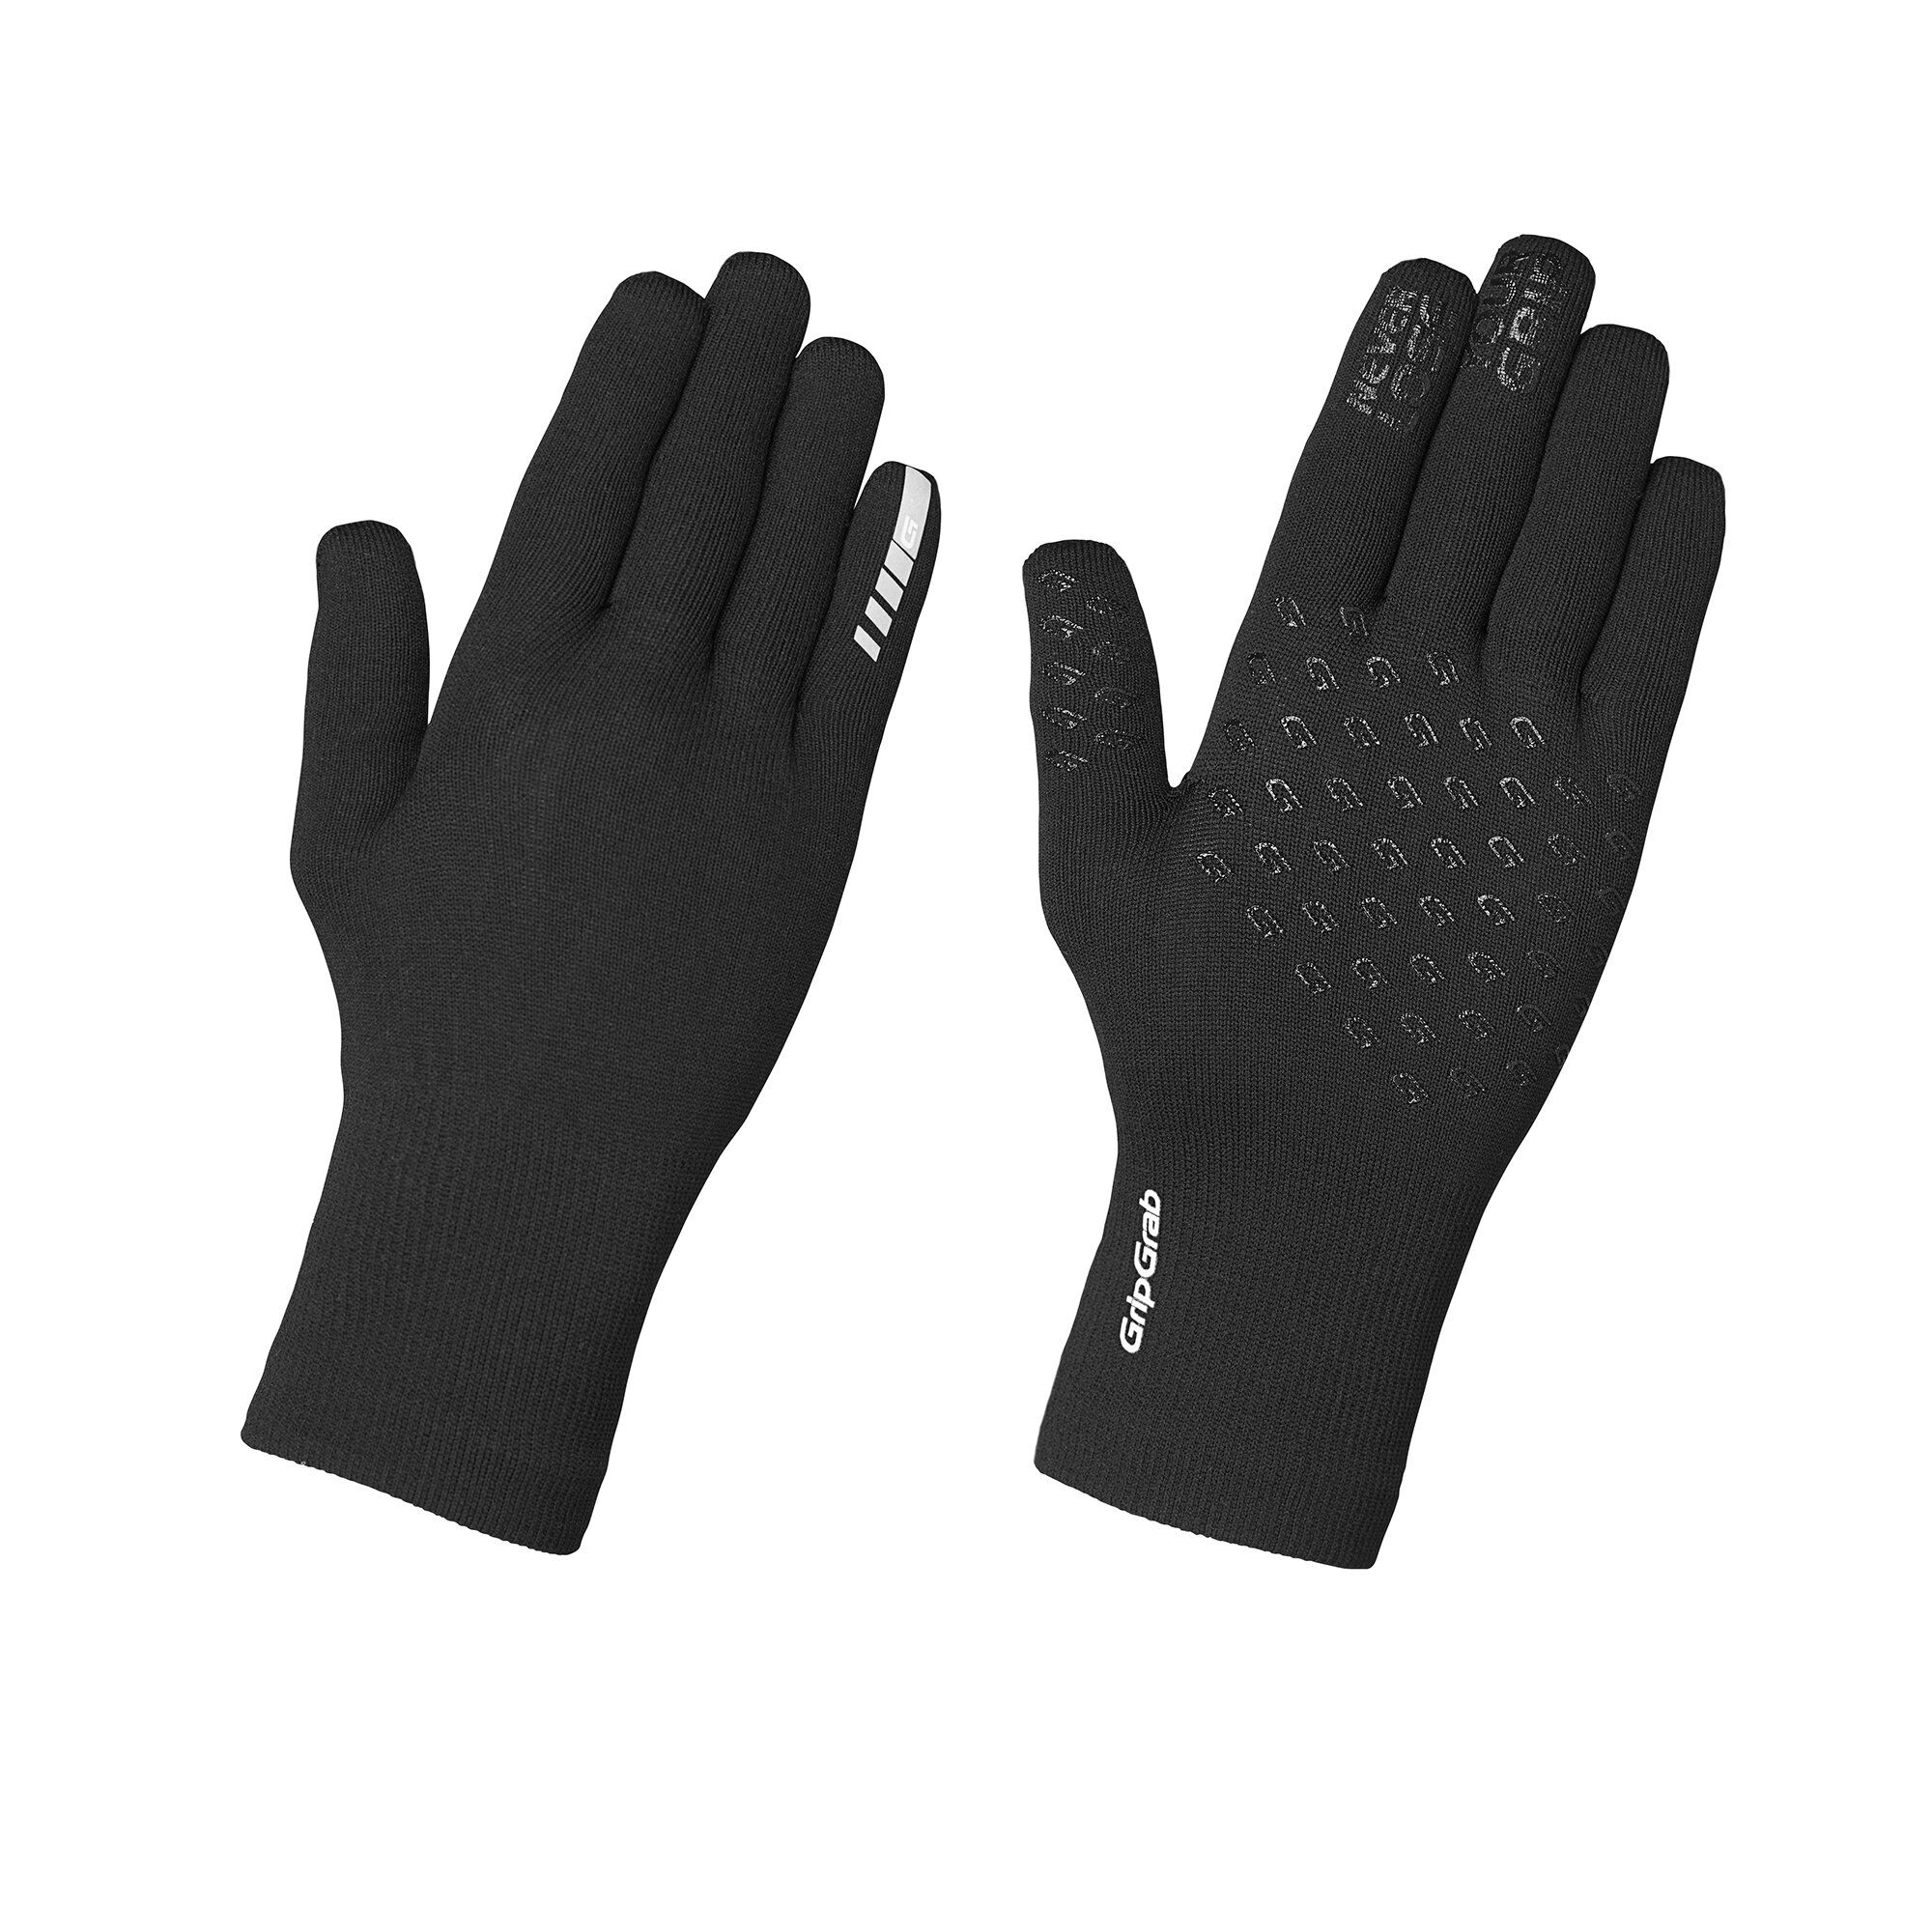 Grip Grab Waterproof Knitted Thermal Glove - Guantes ciclismo